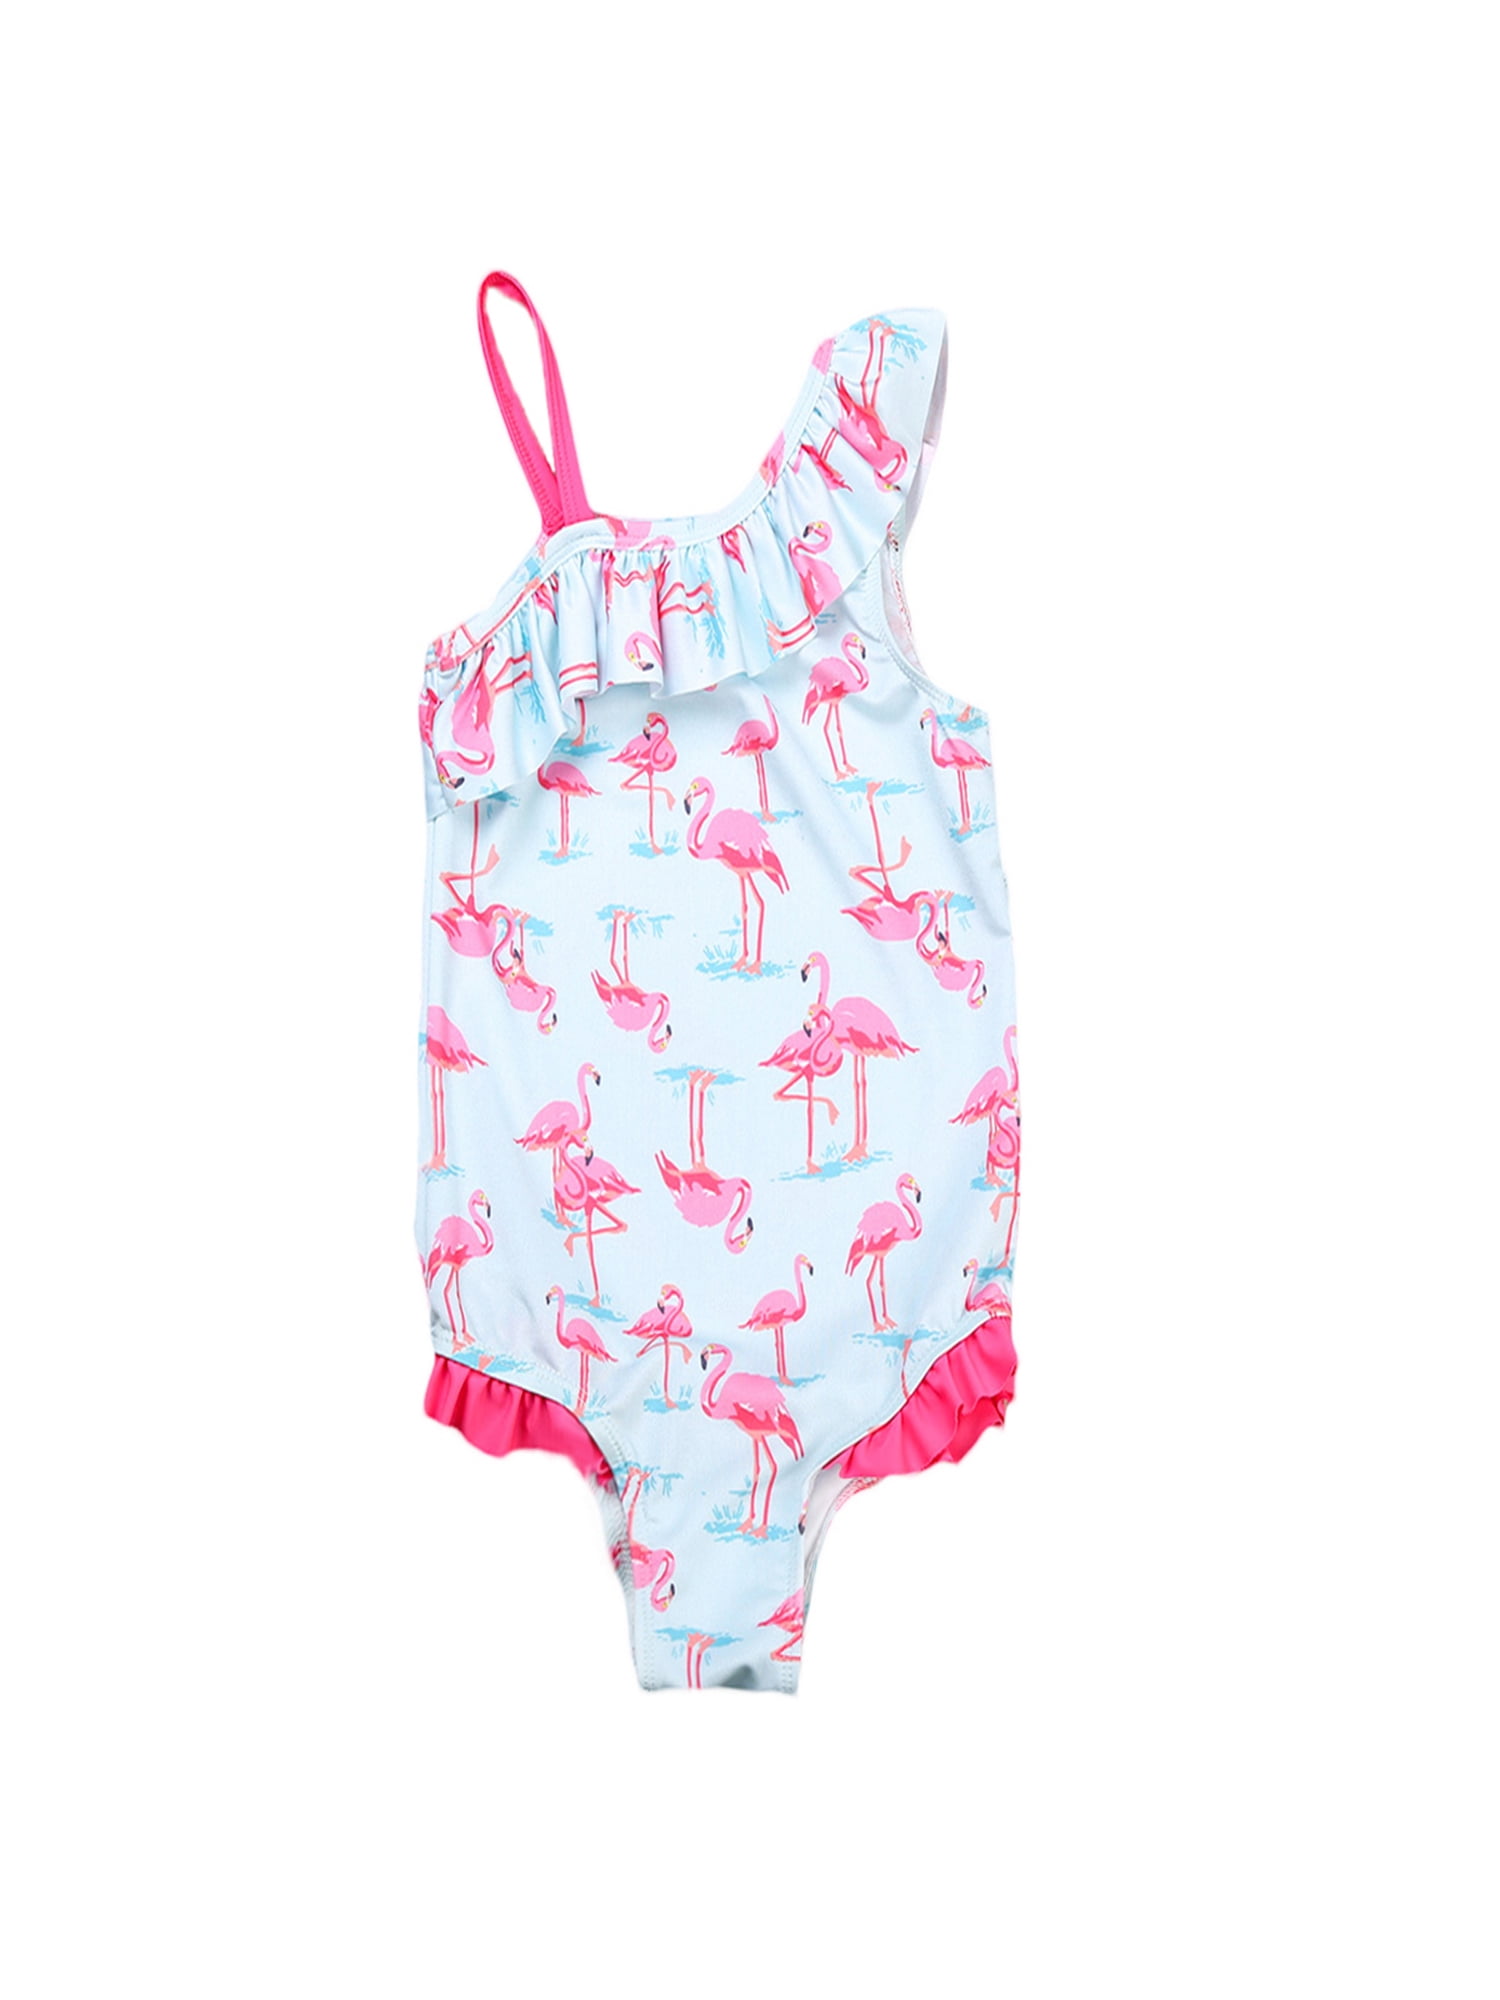 Baby Girls Toddler One Piece Swimsuit BNWT Flamingo 12-18 & 18-24 Months 